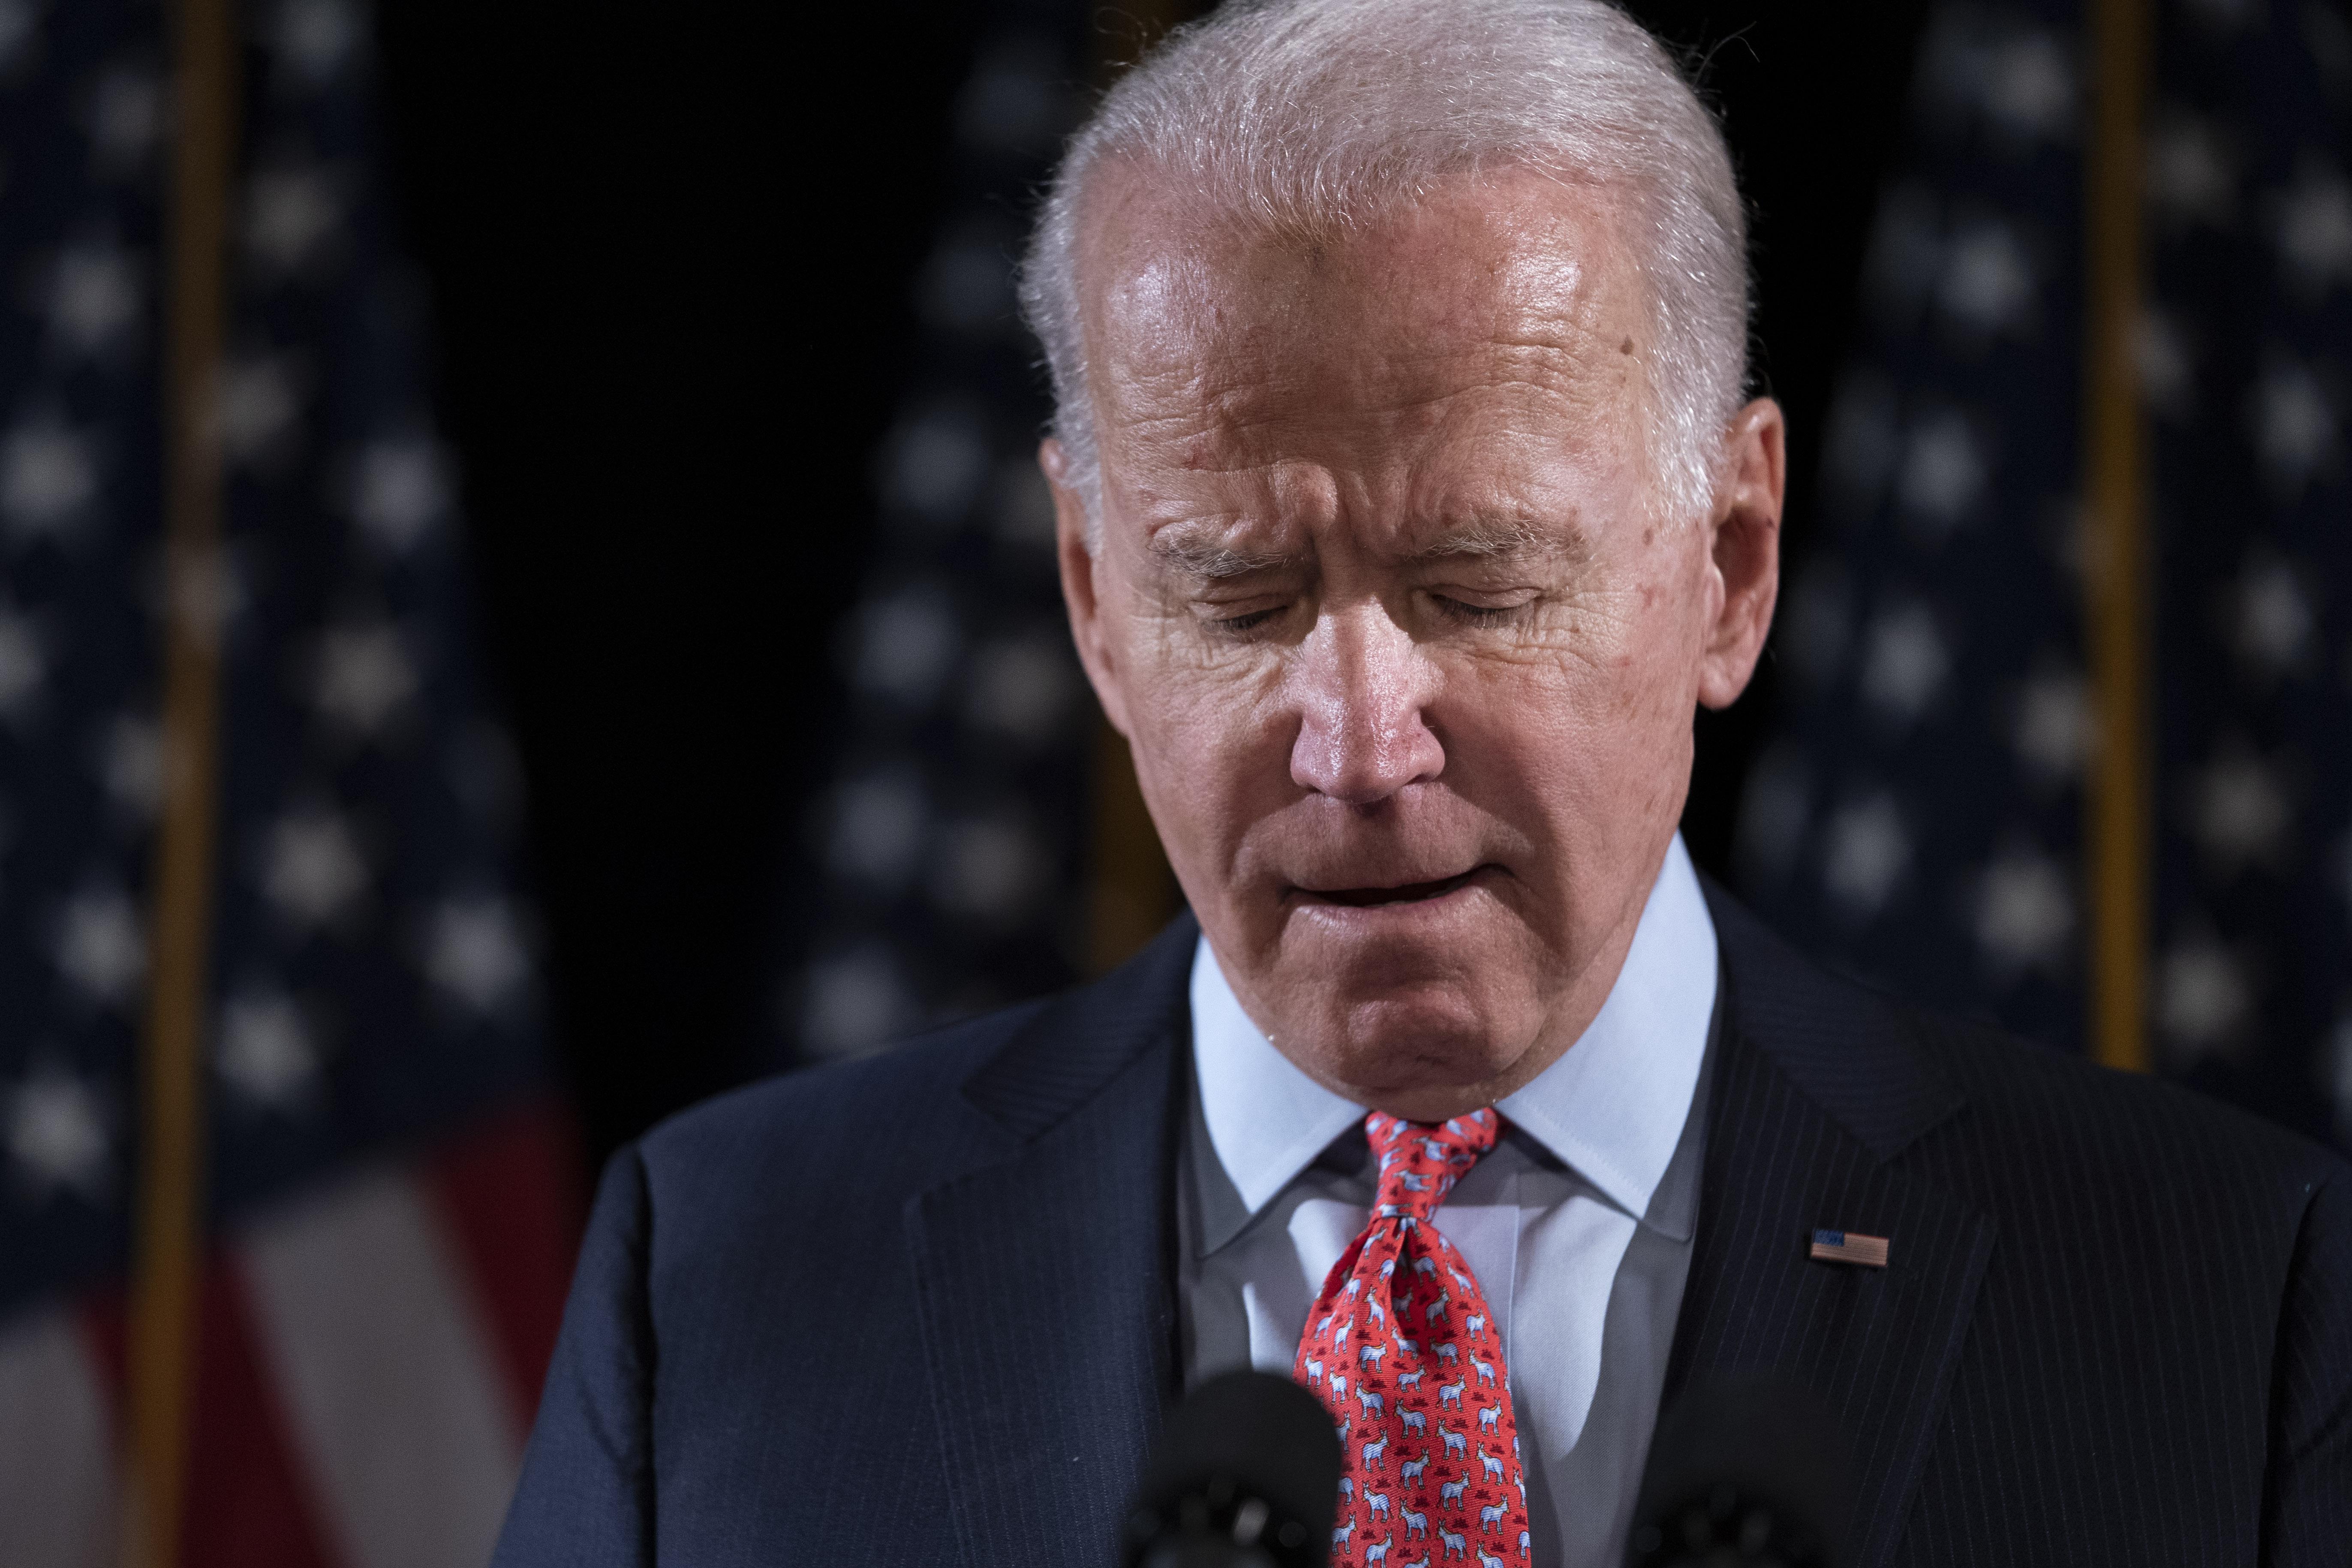 Biden speaks onstage at a mic, looking down with his eyes closed.